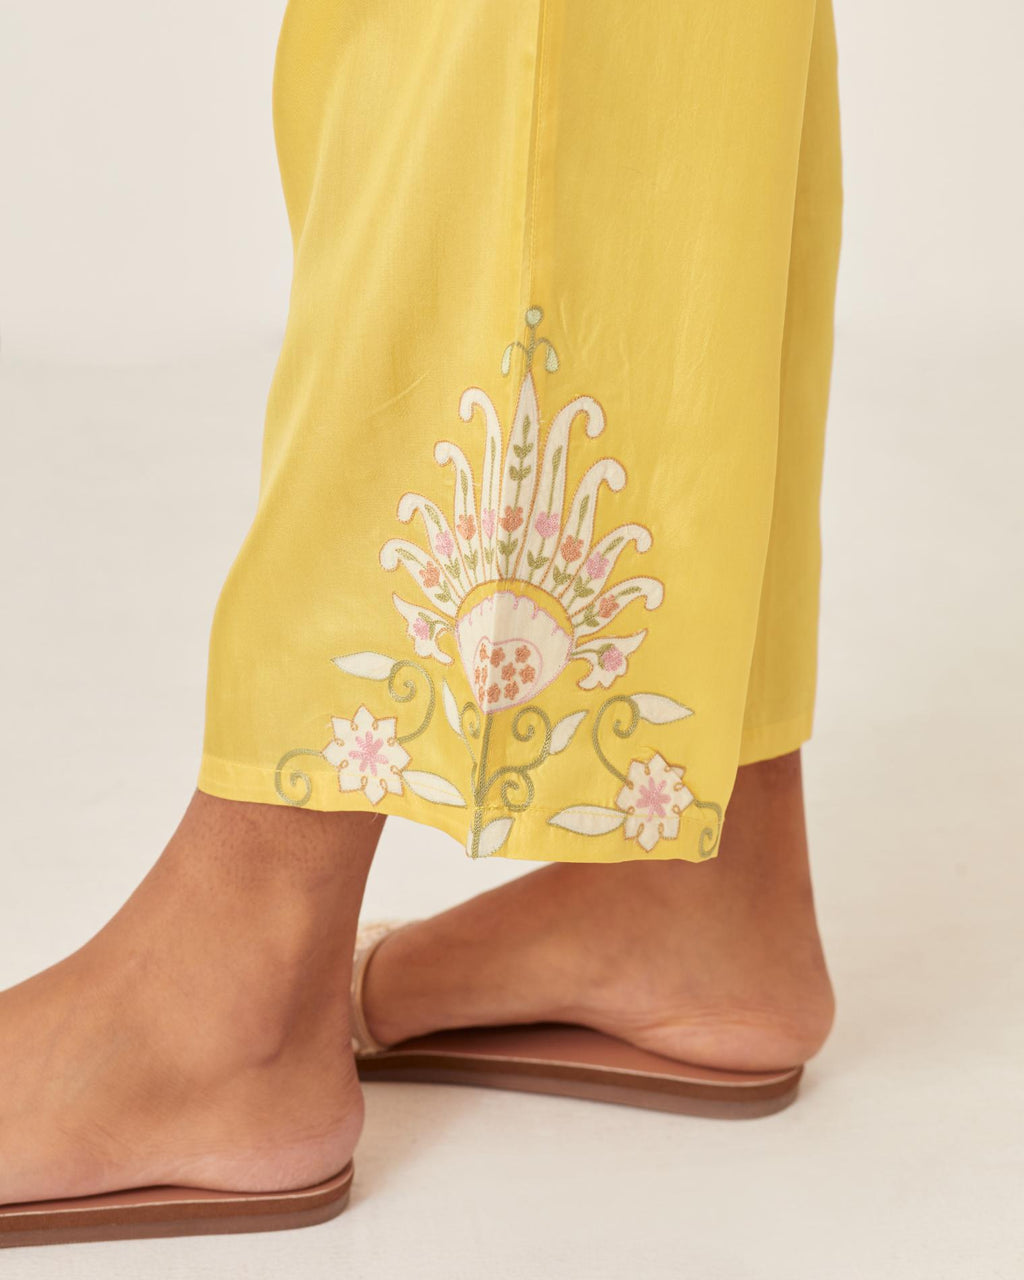 Yellow silk straight pants with multi colored appliqué at hem.